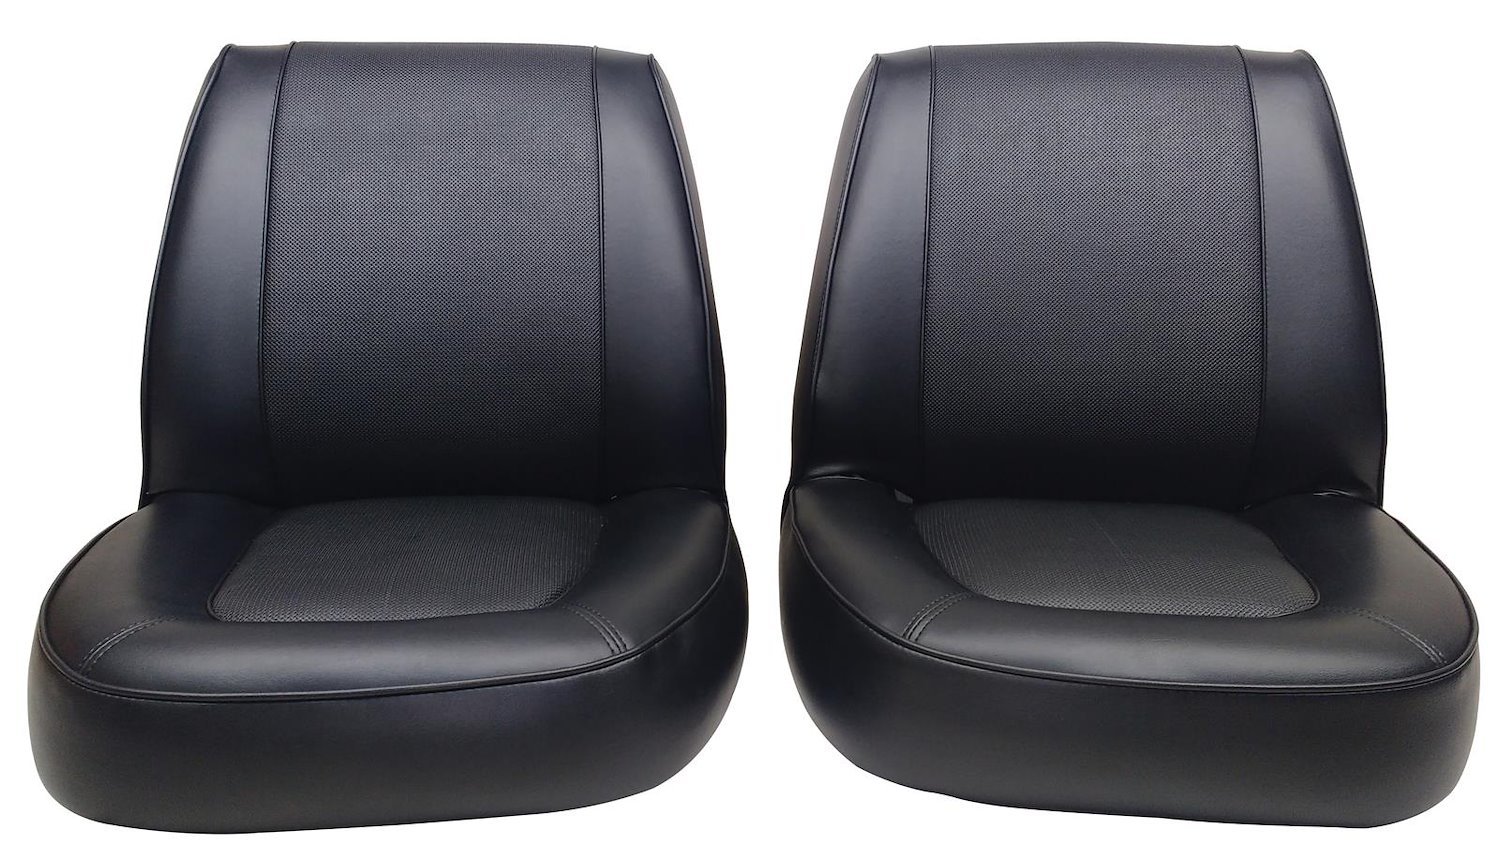 1962-1964 Ford Econoline Falcon Deluxe Club Wagon Interior Two-Tone Front Bucket Seat Upholsterty Set